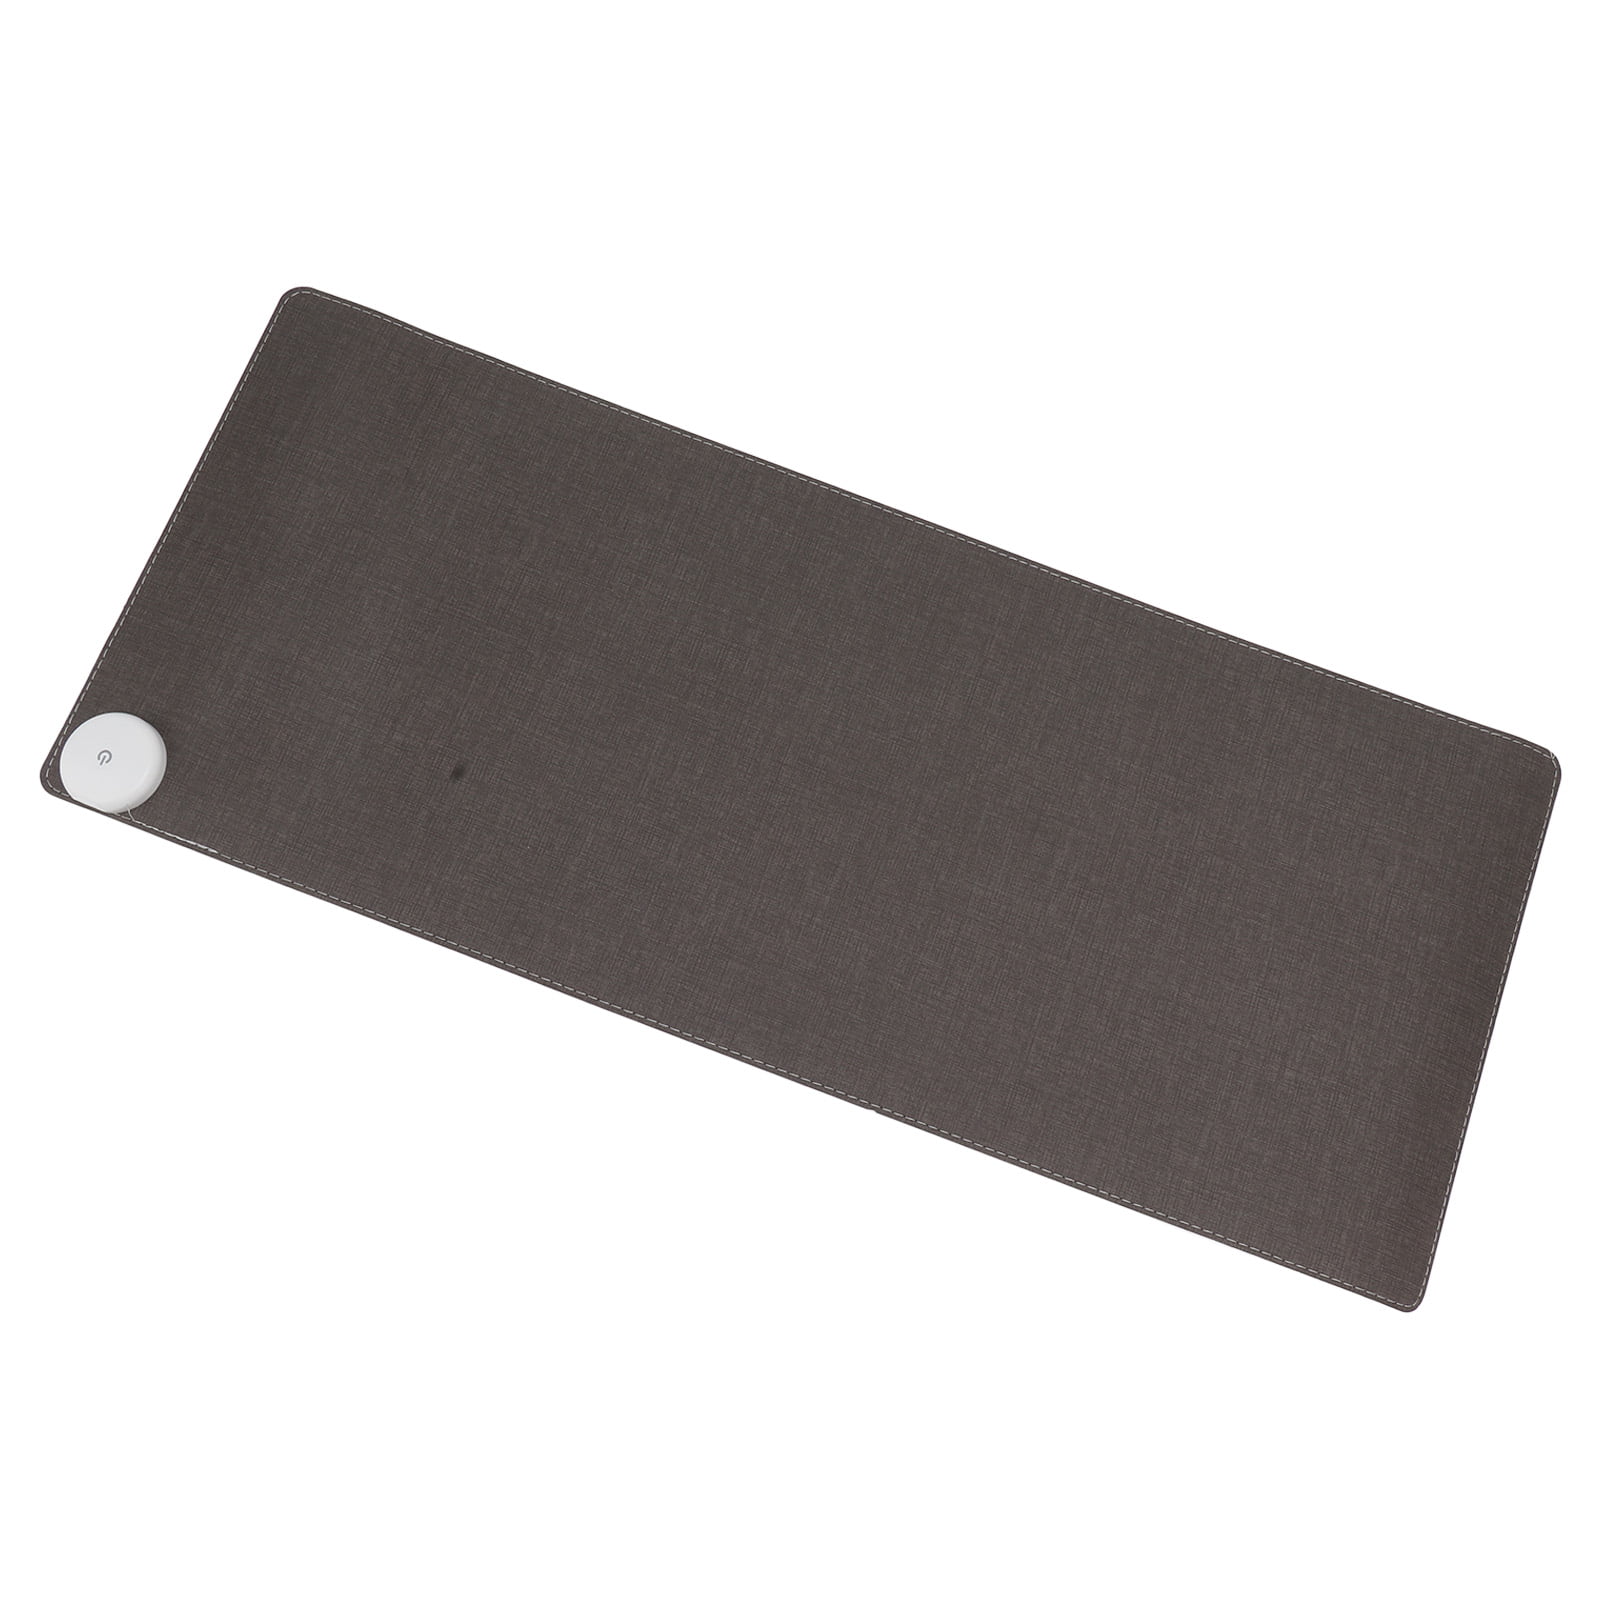 TEMGCO Warm Desk Pad, Heated Mouse Pad, Office Desk Mat with 3 Speeds Touch  Control Temperature